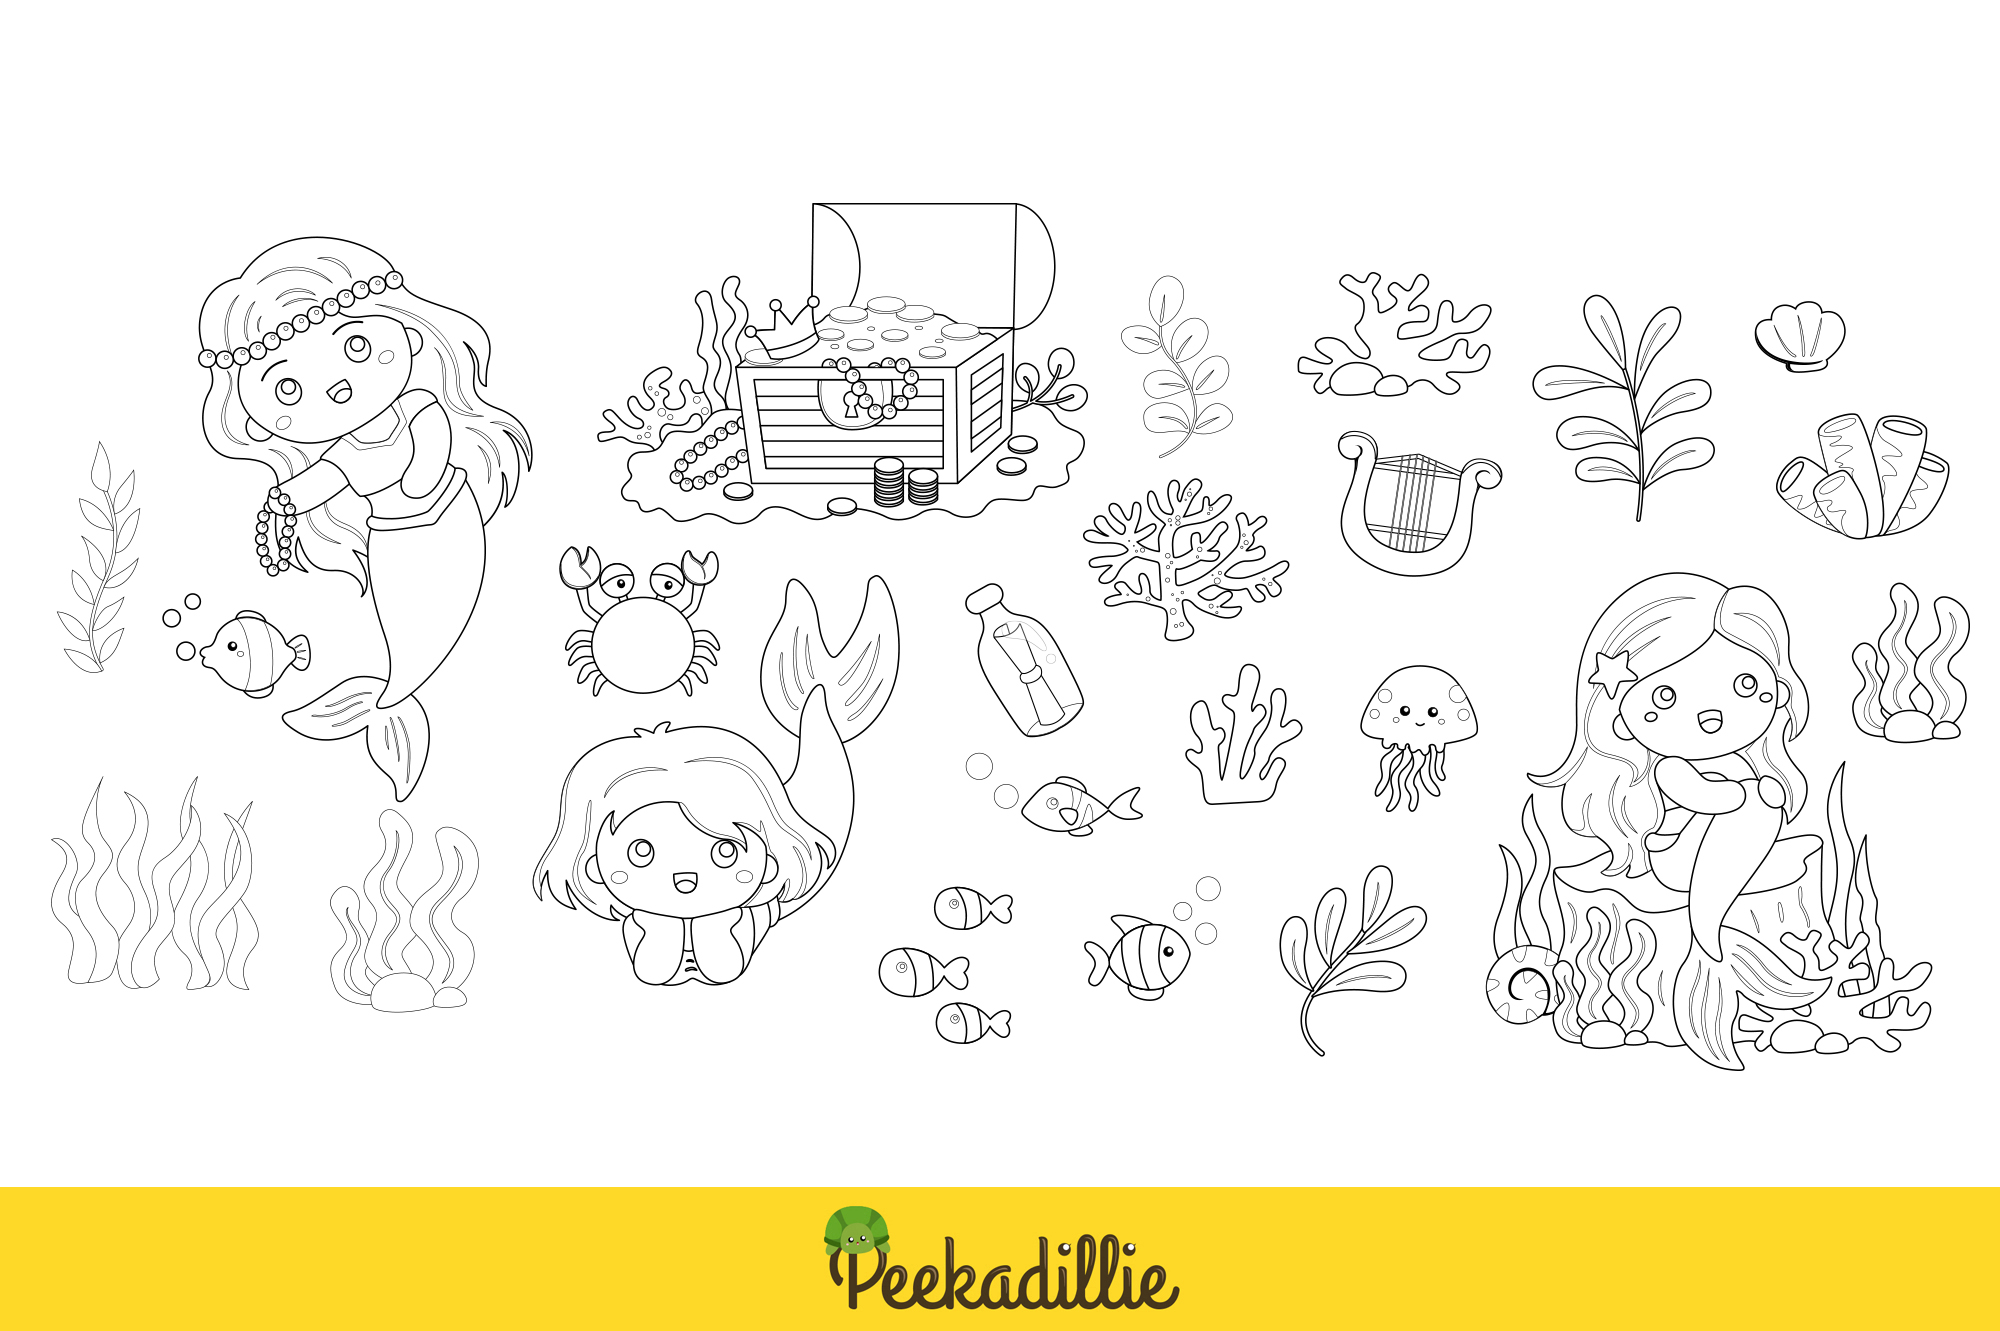 Coloring page with a mermaid and other sea creatures.